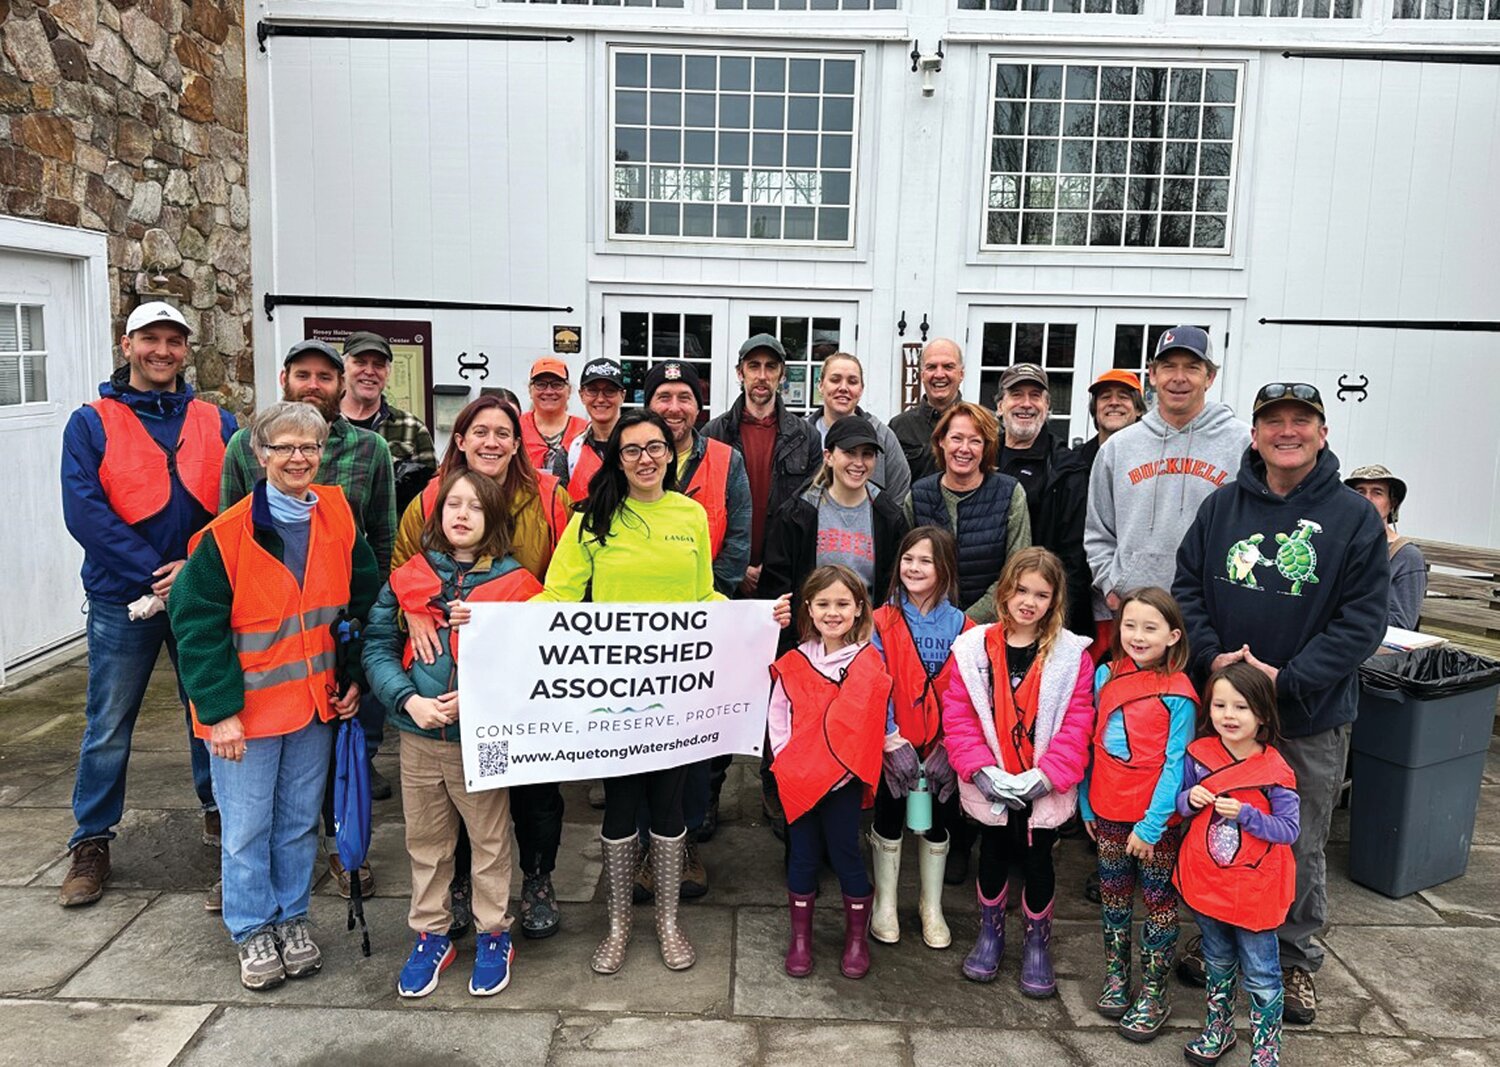 This cleanup crew filled 40 bags of trash during an April 20 event to beautify the Aquetong Watershed.